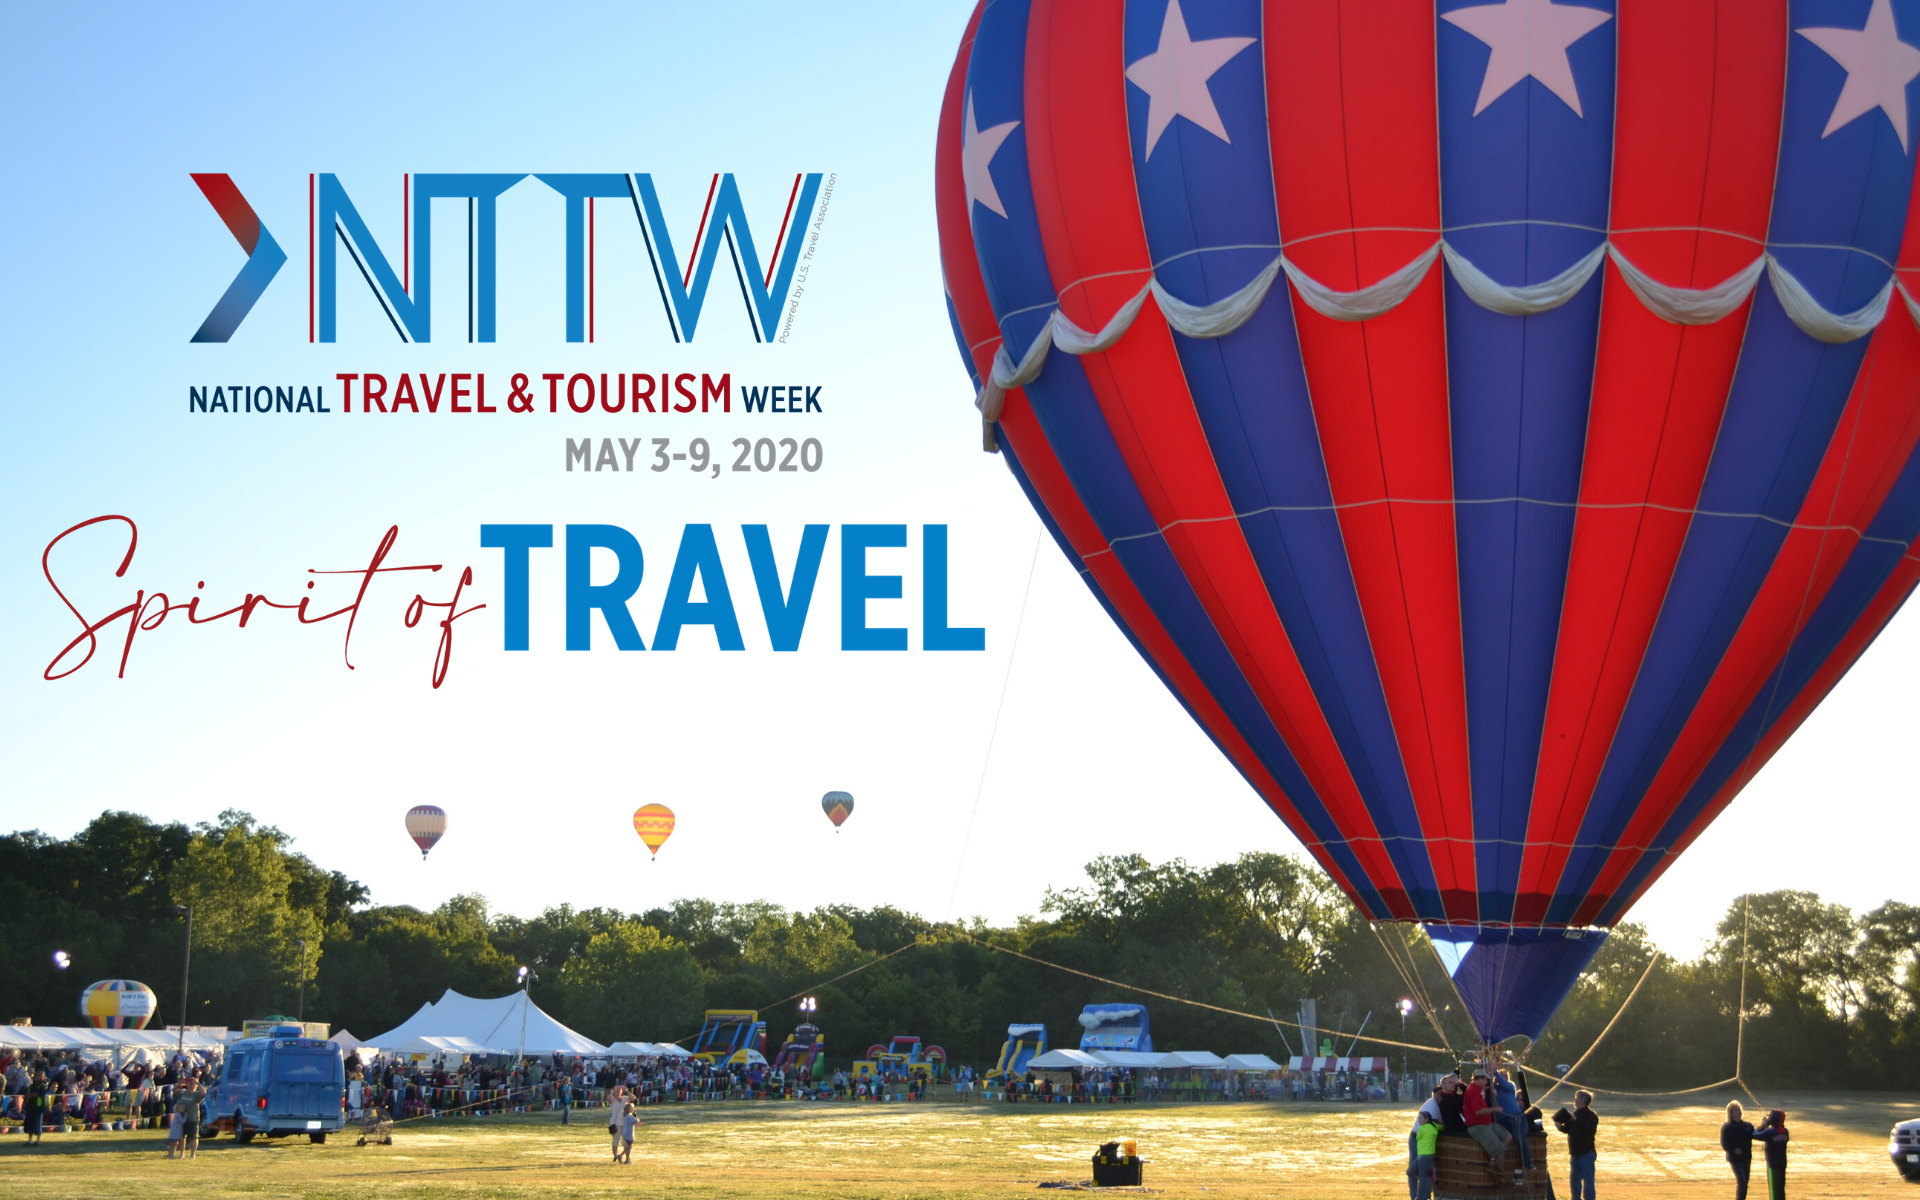 Plano supports the spirit of travel during National Travel & Tourism Week